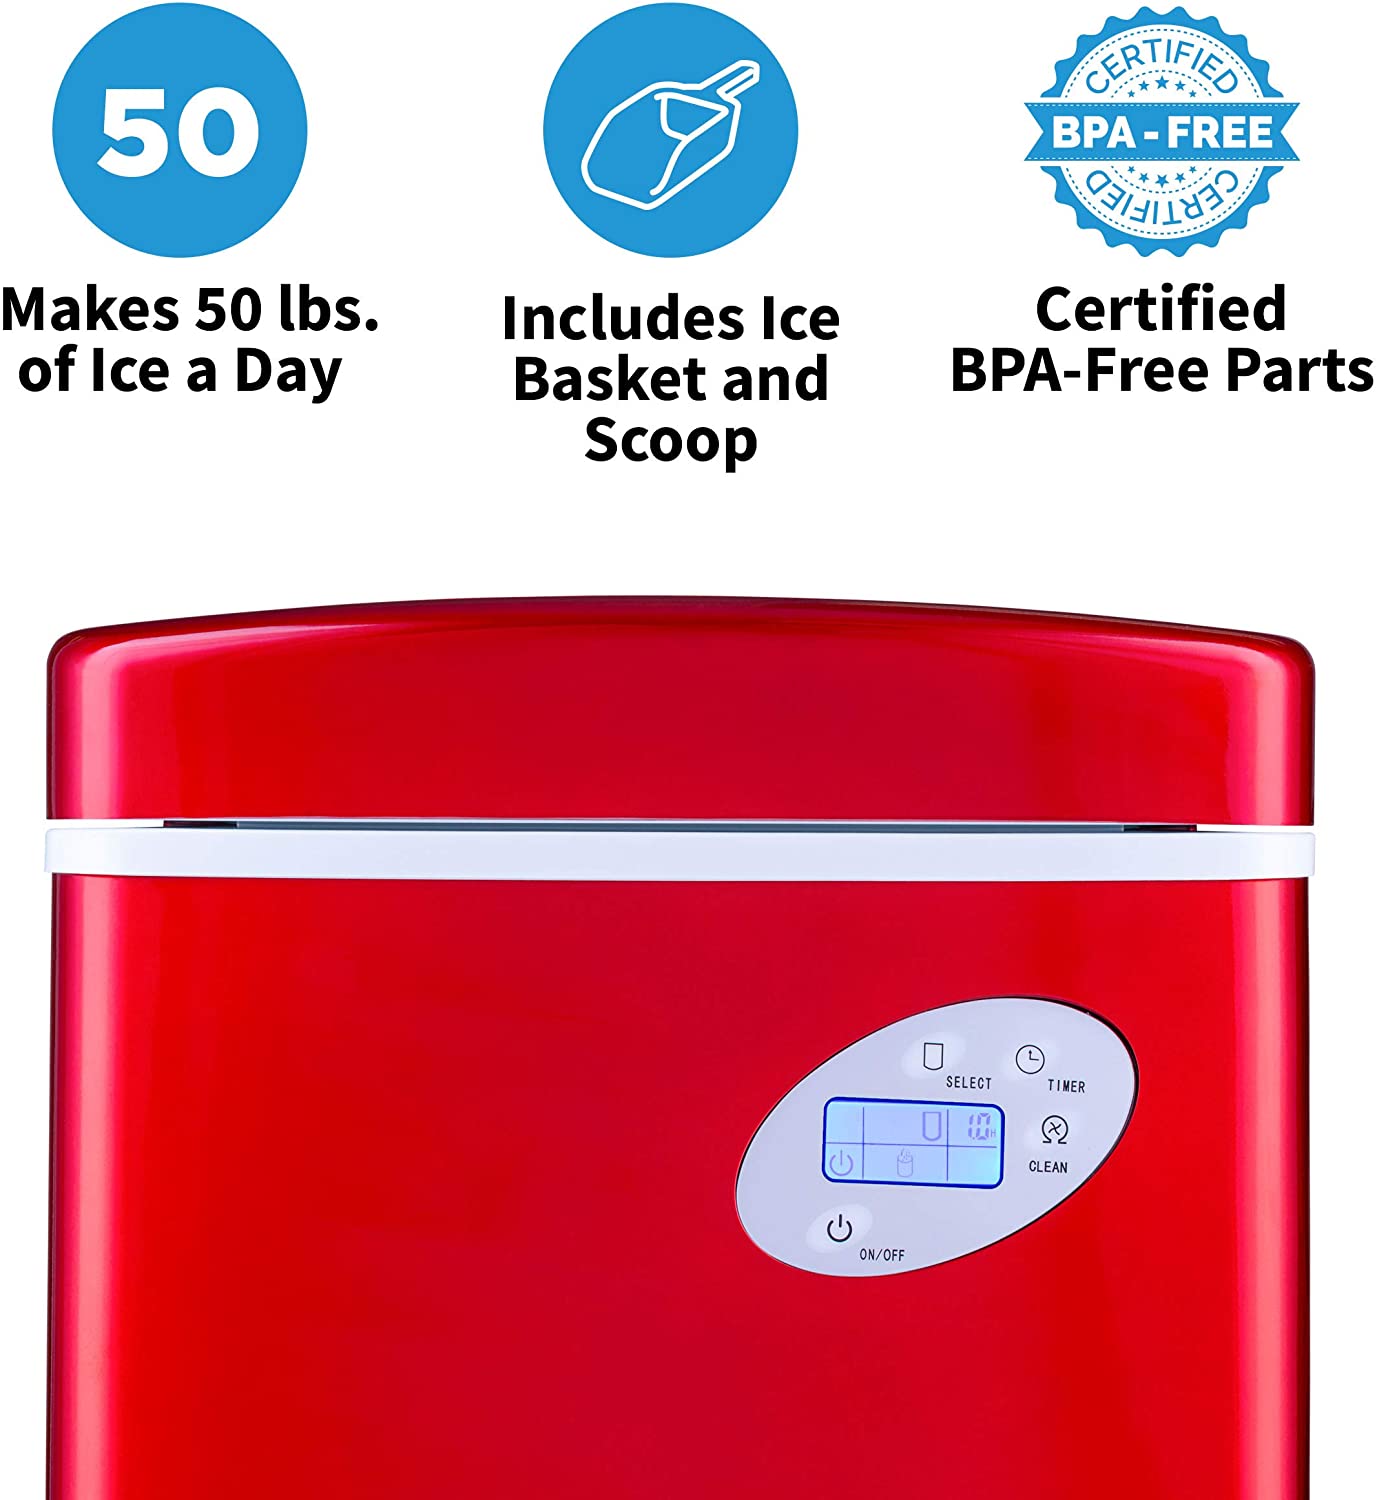 10 Best Extra Large Portable Ice Maker with More Production Storage (33Lb, 40Lb, 48Lb, 50Lb) in 2022 Review All In One Cooling Gear Lab: Any Refrigerators Air Conditioners Freezers Ice Makers Coolers Fans Reviewed And Compared.